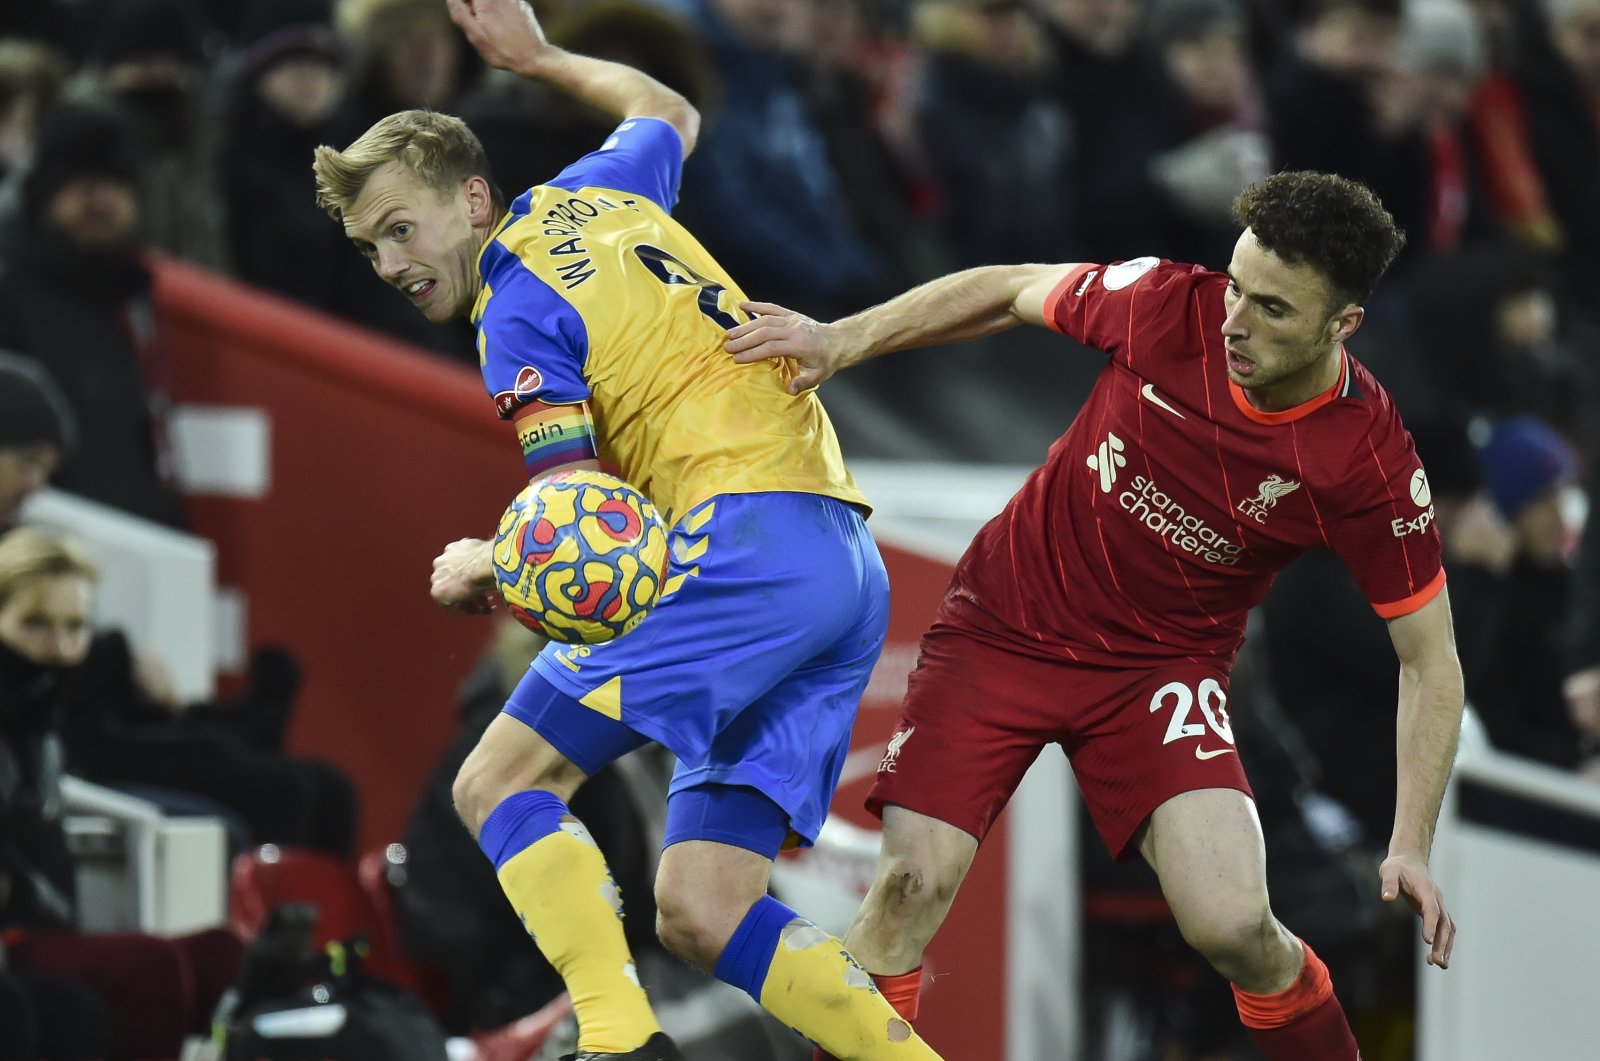 Southampton&#039;s James Ward-Prowse (L) in action against Liverpool&#039;s Diogo Jota (R) during a Premier League match in Liverpool, England, Nov. 27, 2021. (EPA Photo)